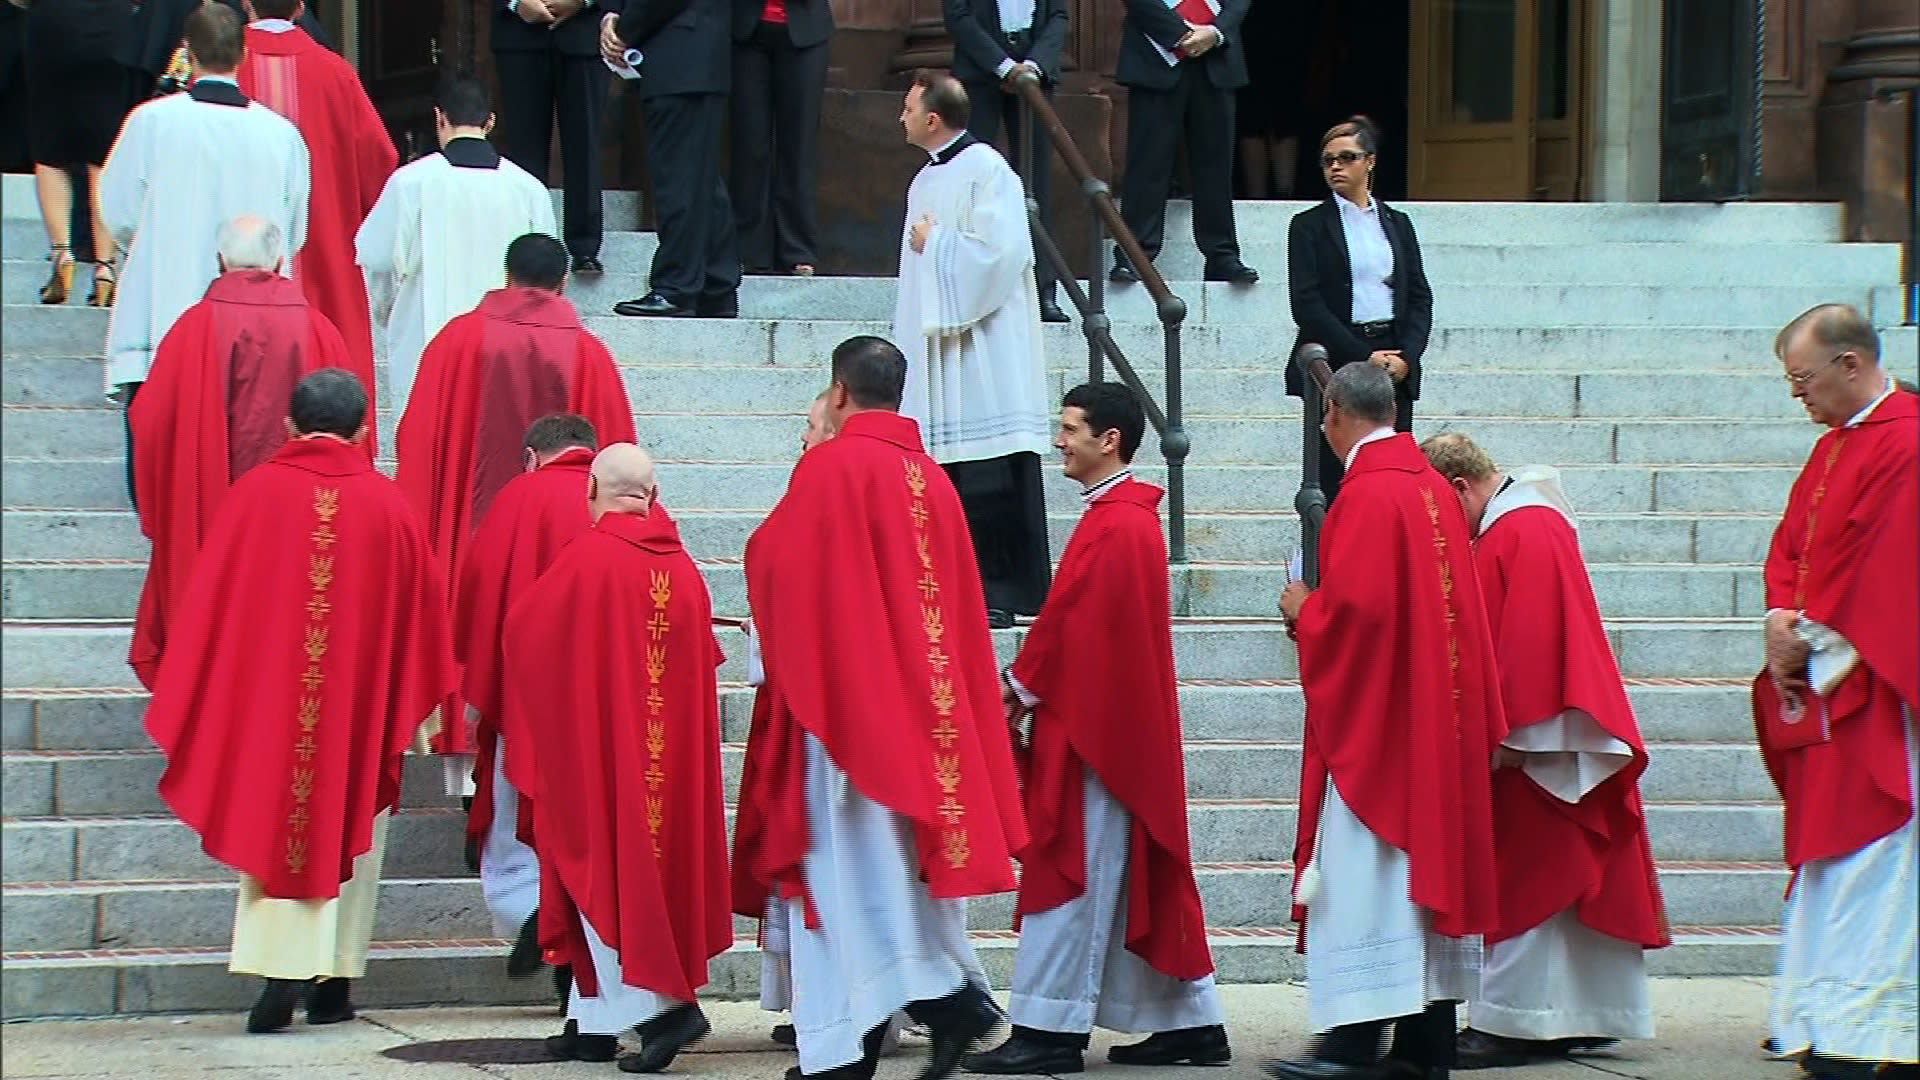 Clergy members file into the Cathedral of St. Matthew the Apostle in Washington for Sunday's Red Mass.